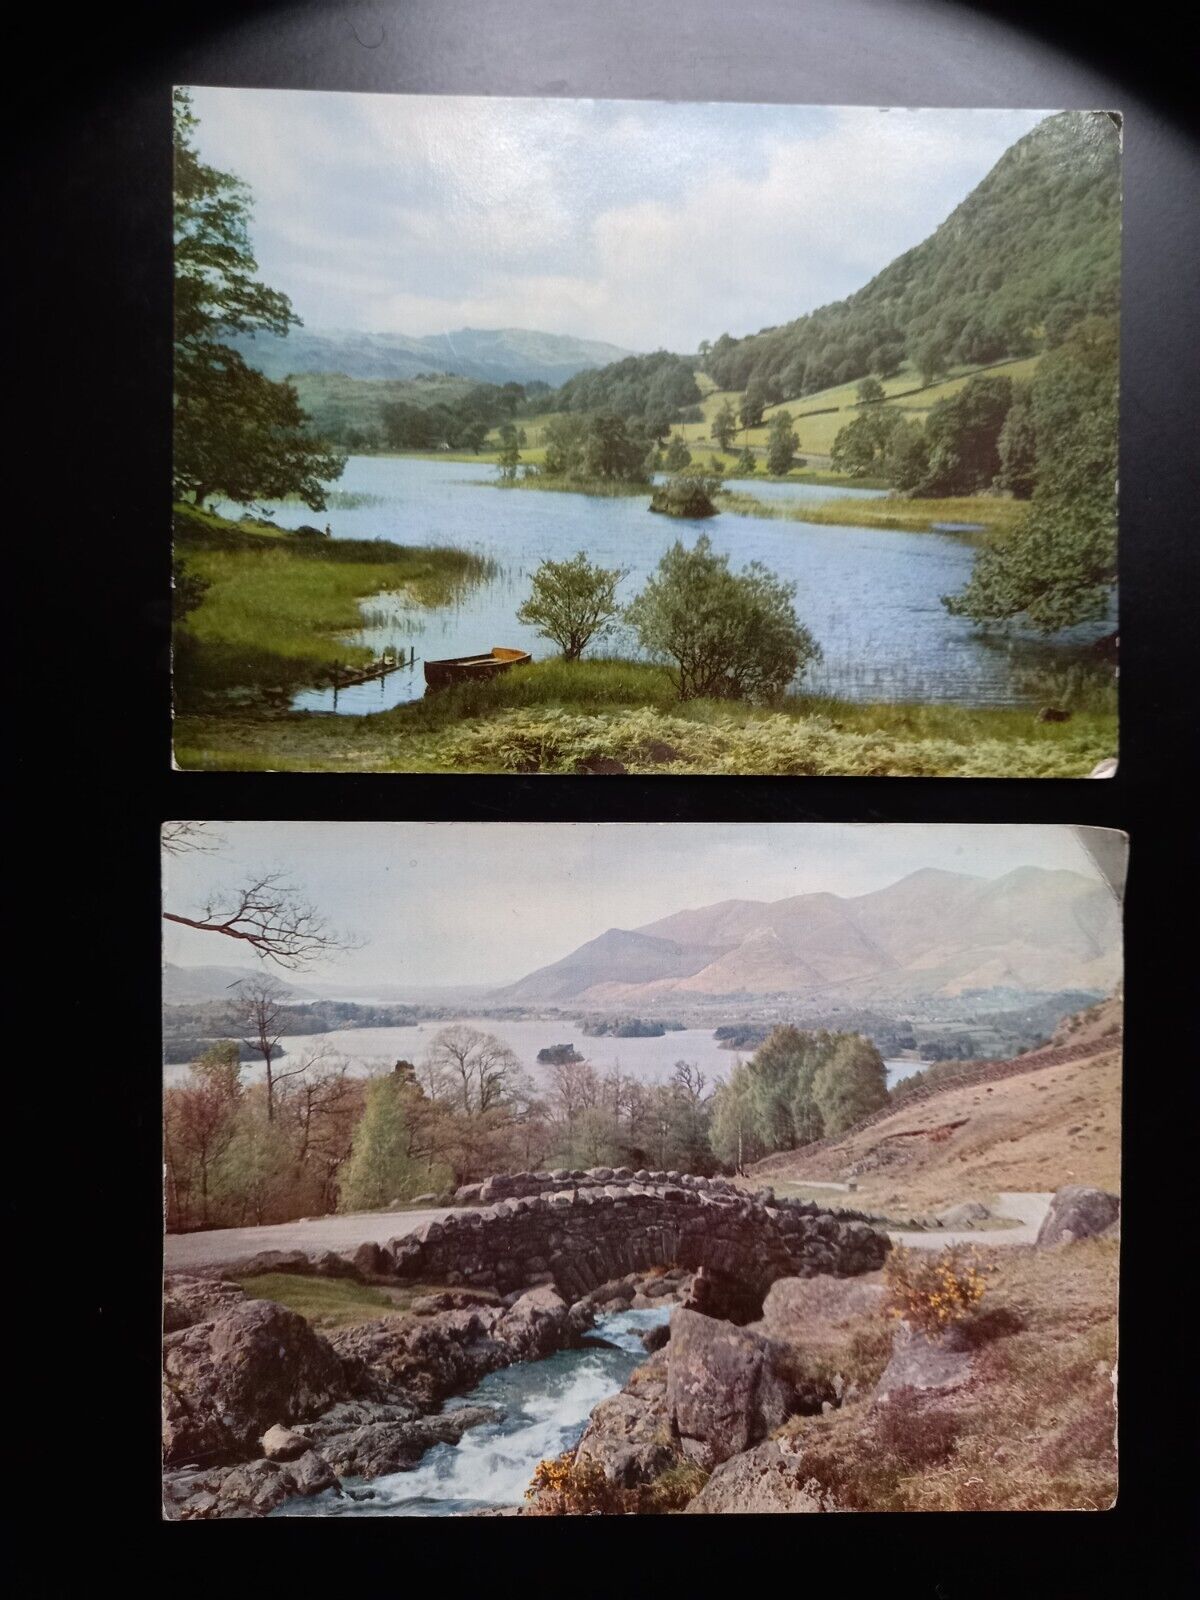 House Clearance - Antique Extra Large Services Rydal Water Ashness Bridge Derwentwater Keswick